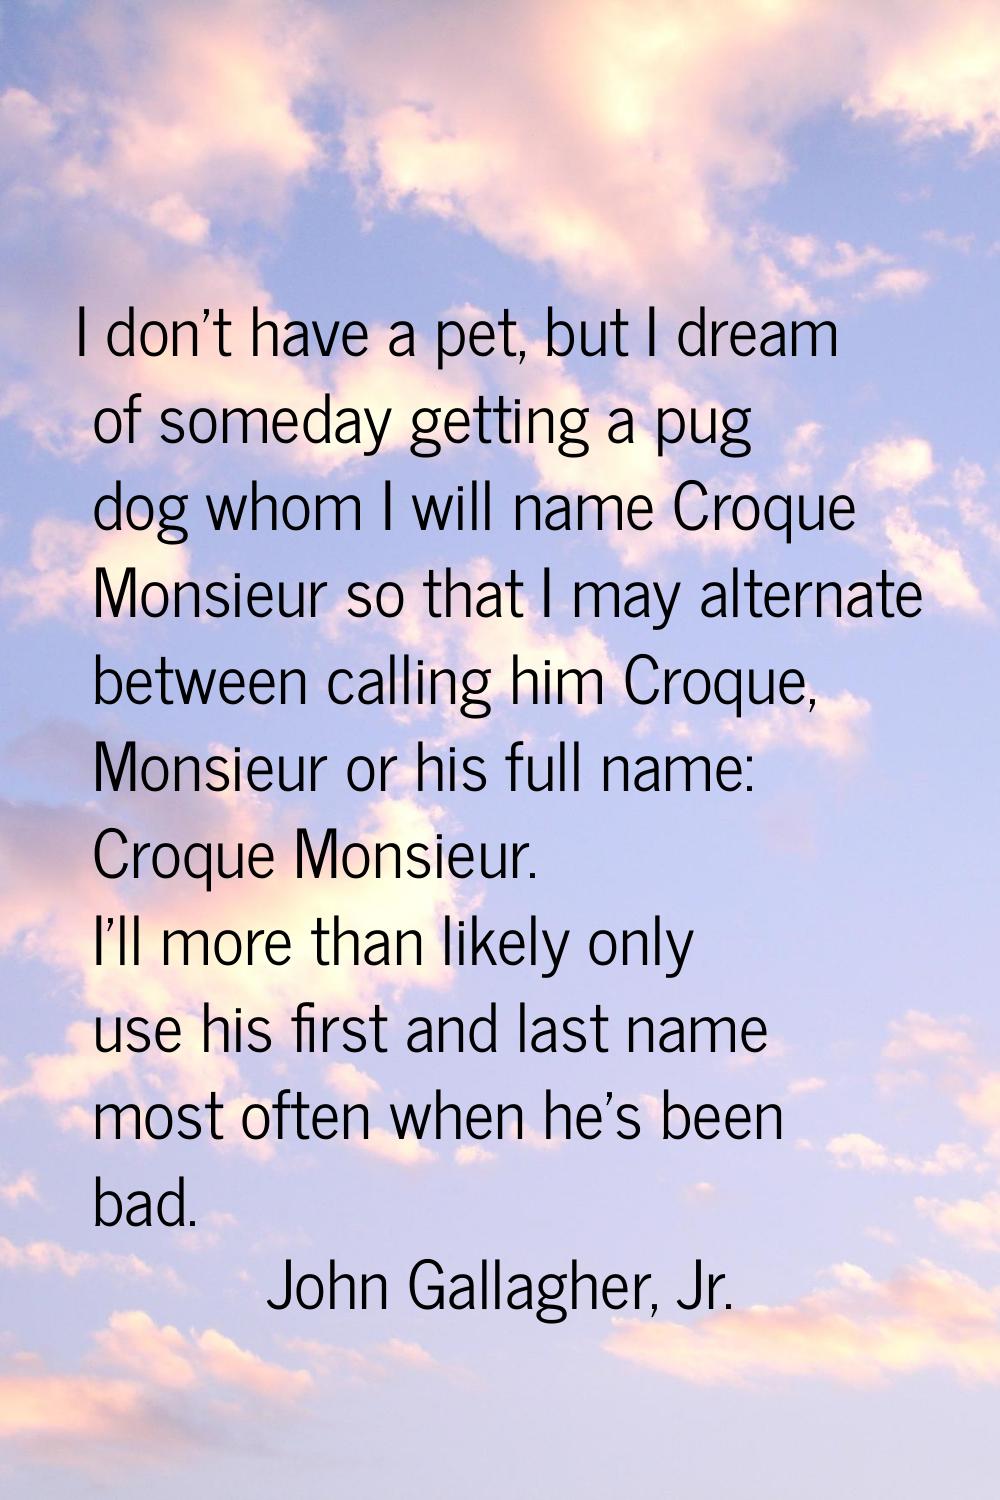 I don't have a pet, but I dream of someday getting a pug dog whom I will name Croque Monsieur so th